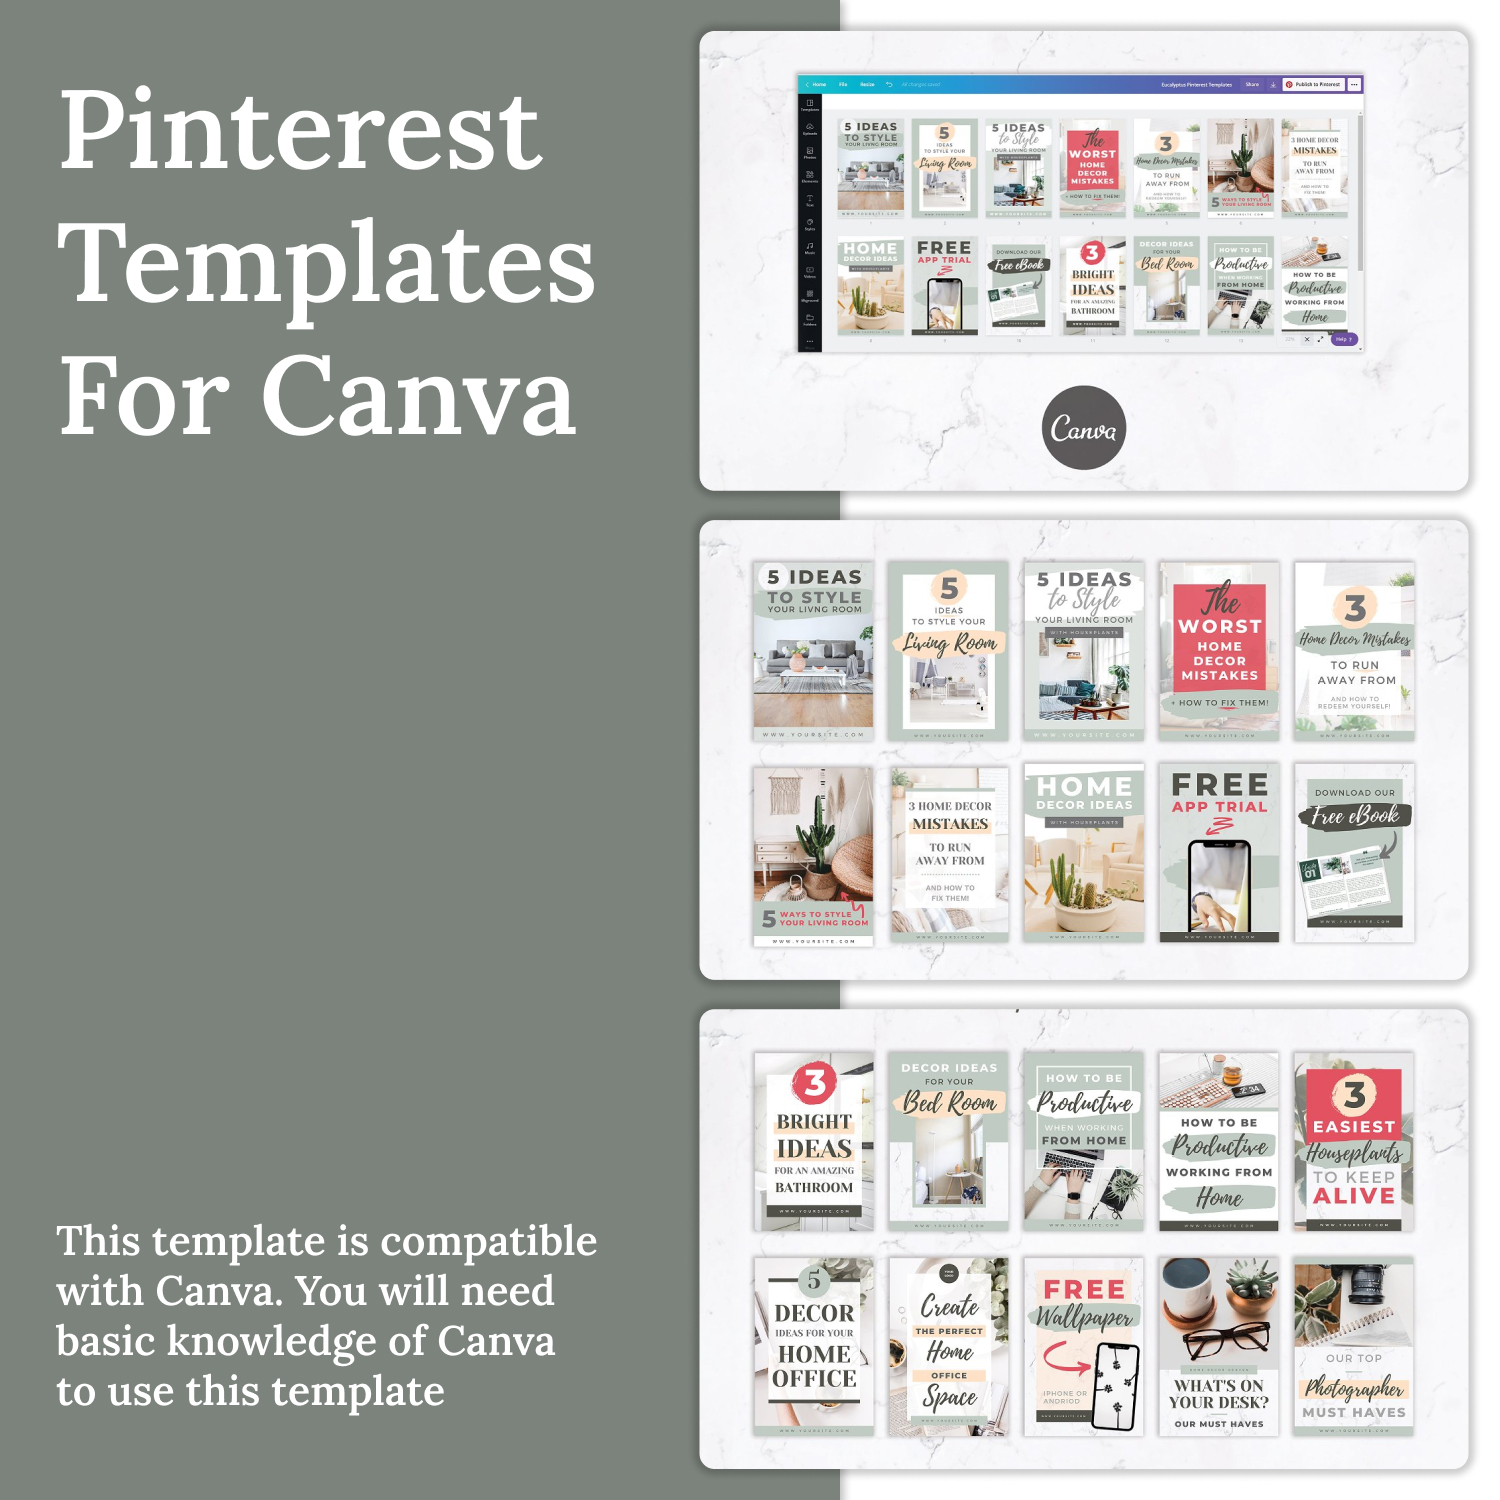 Prints of pinterest templates for canva.